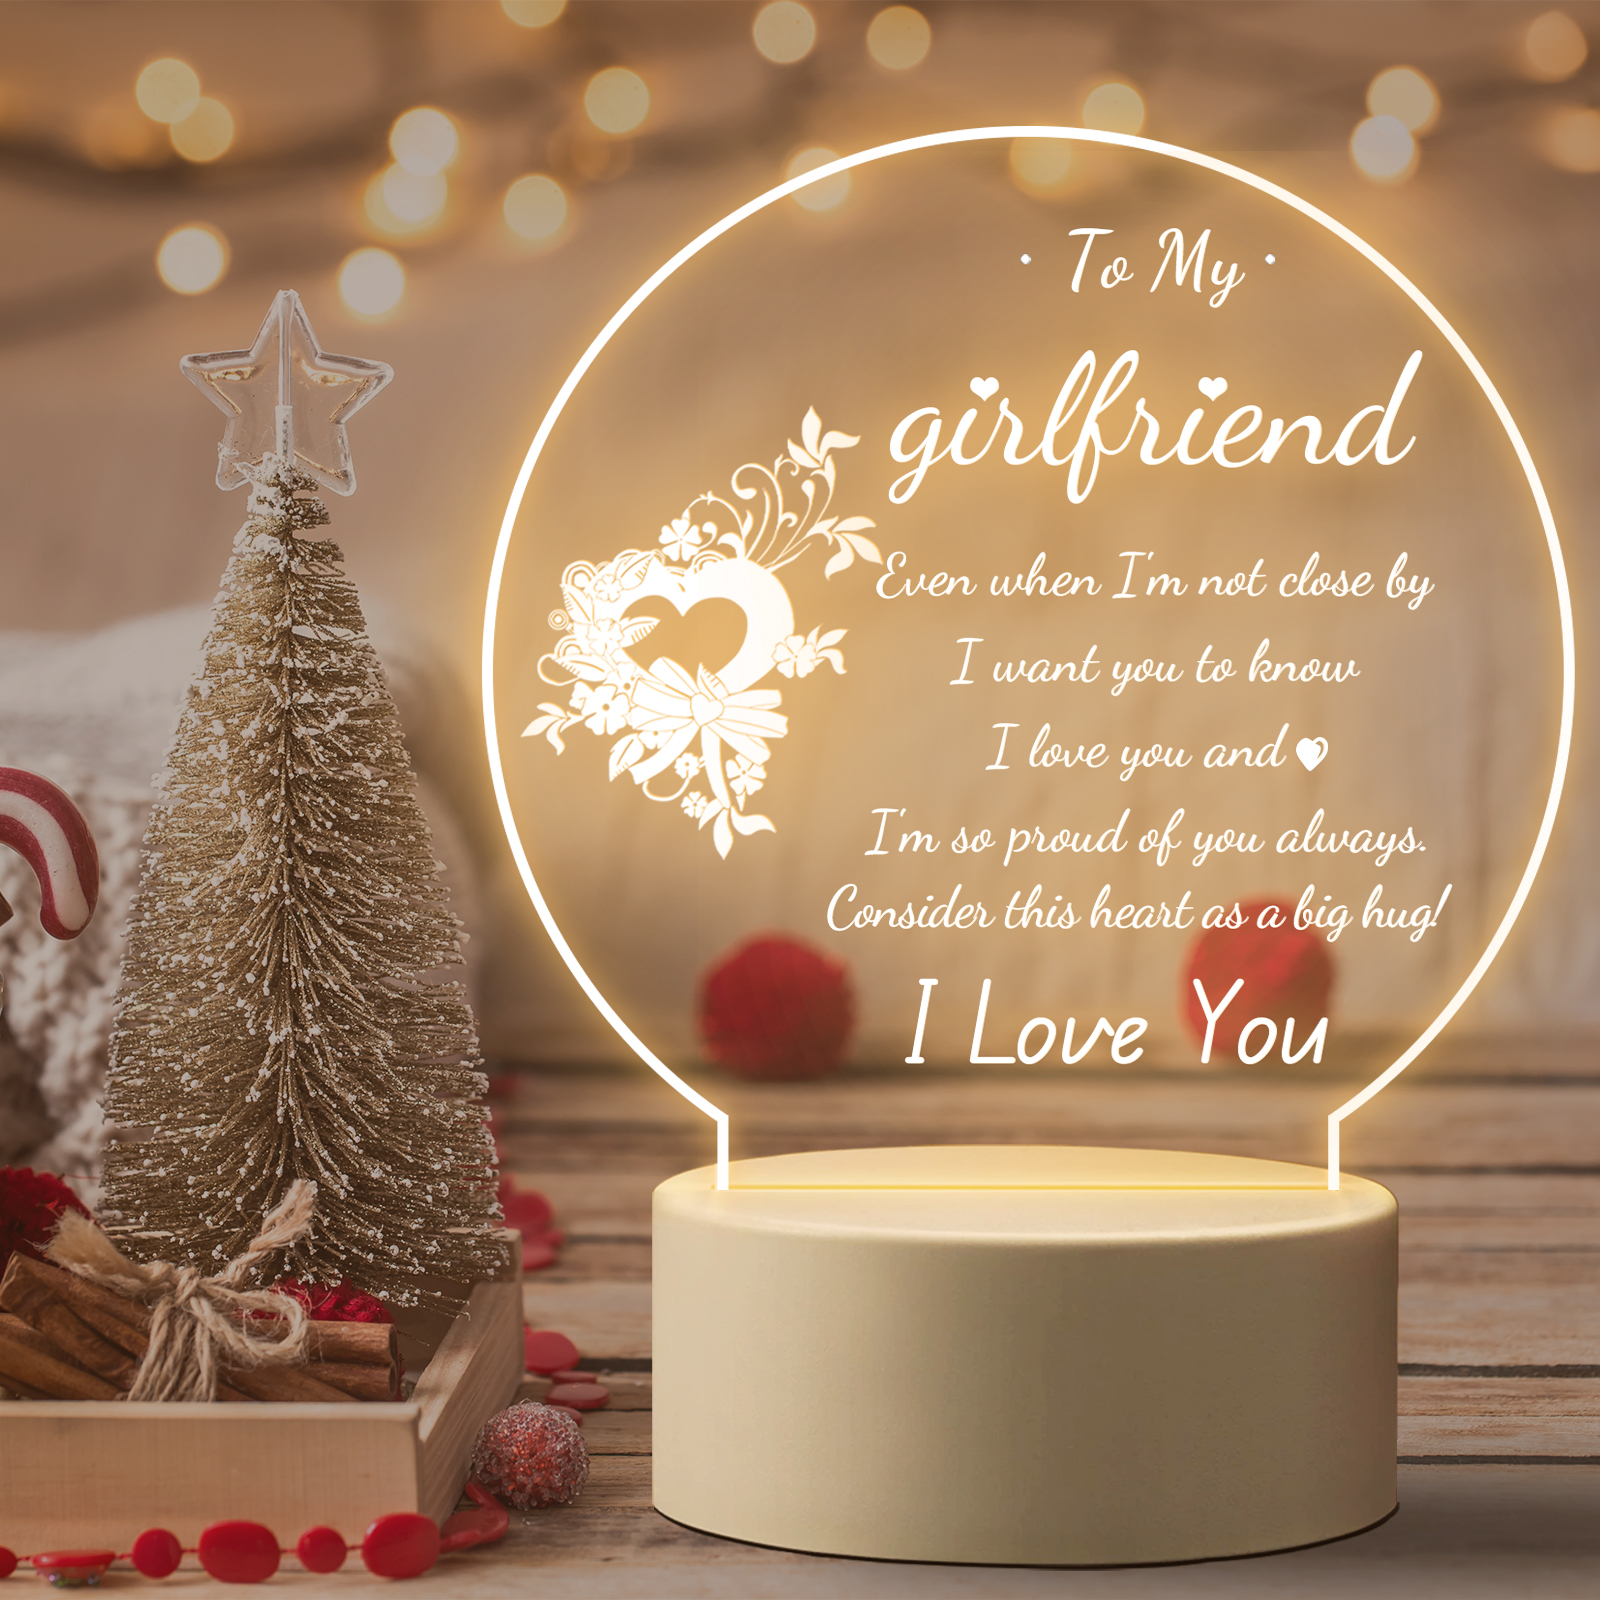 Cute Gifts For Girlfriends, Girlfriend Birthday Gifts From